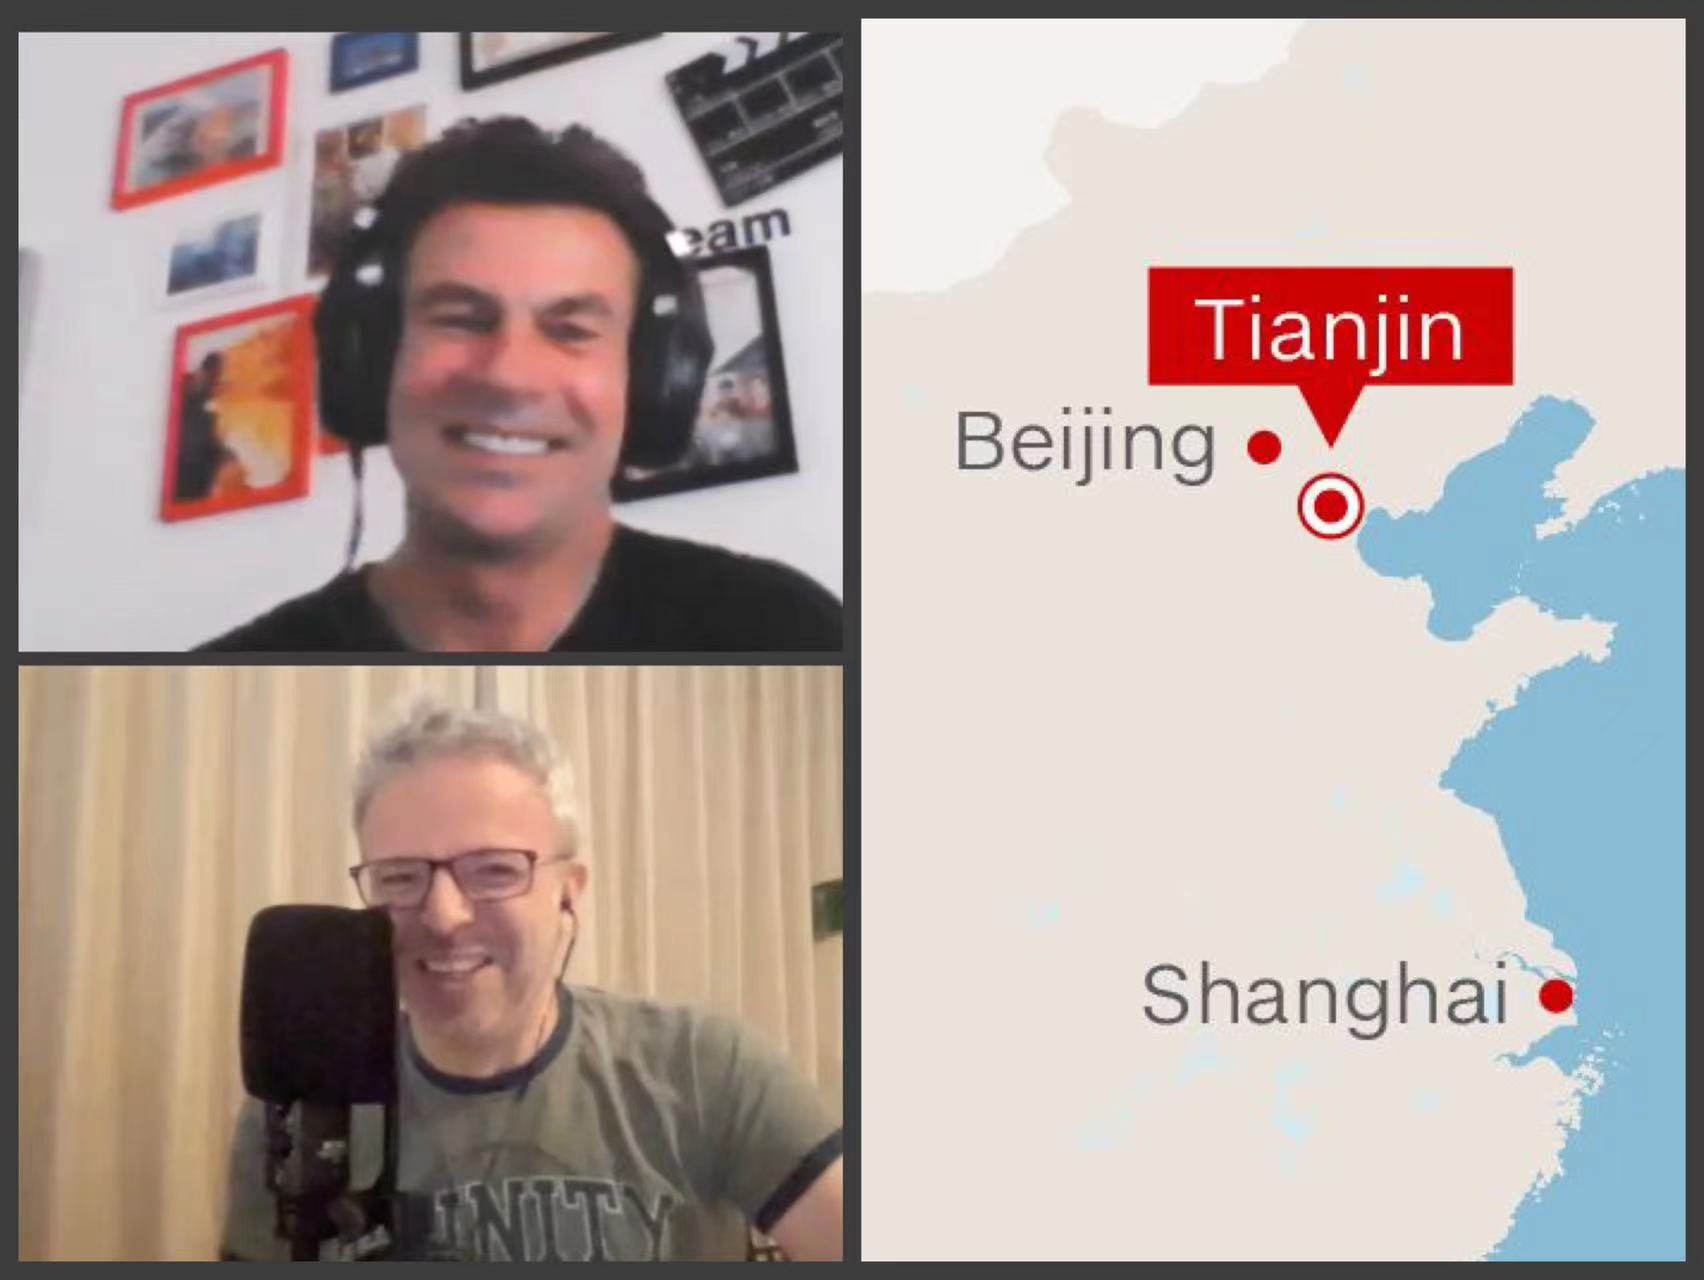 Frank Abel: Due to travel restrictions at the time, this episode was recorded remotely with Frank in 天津 [Tiānjīn] and Oscar in Shanghai.